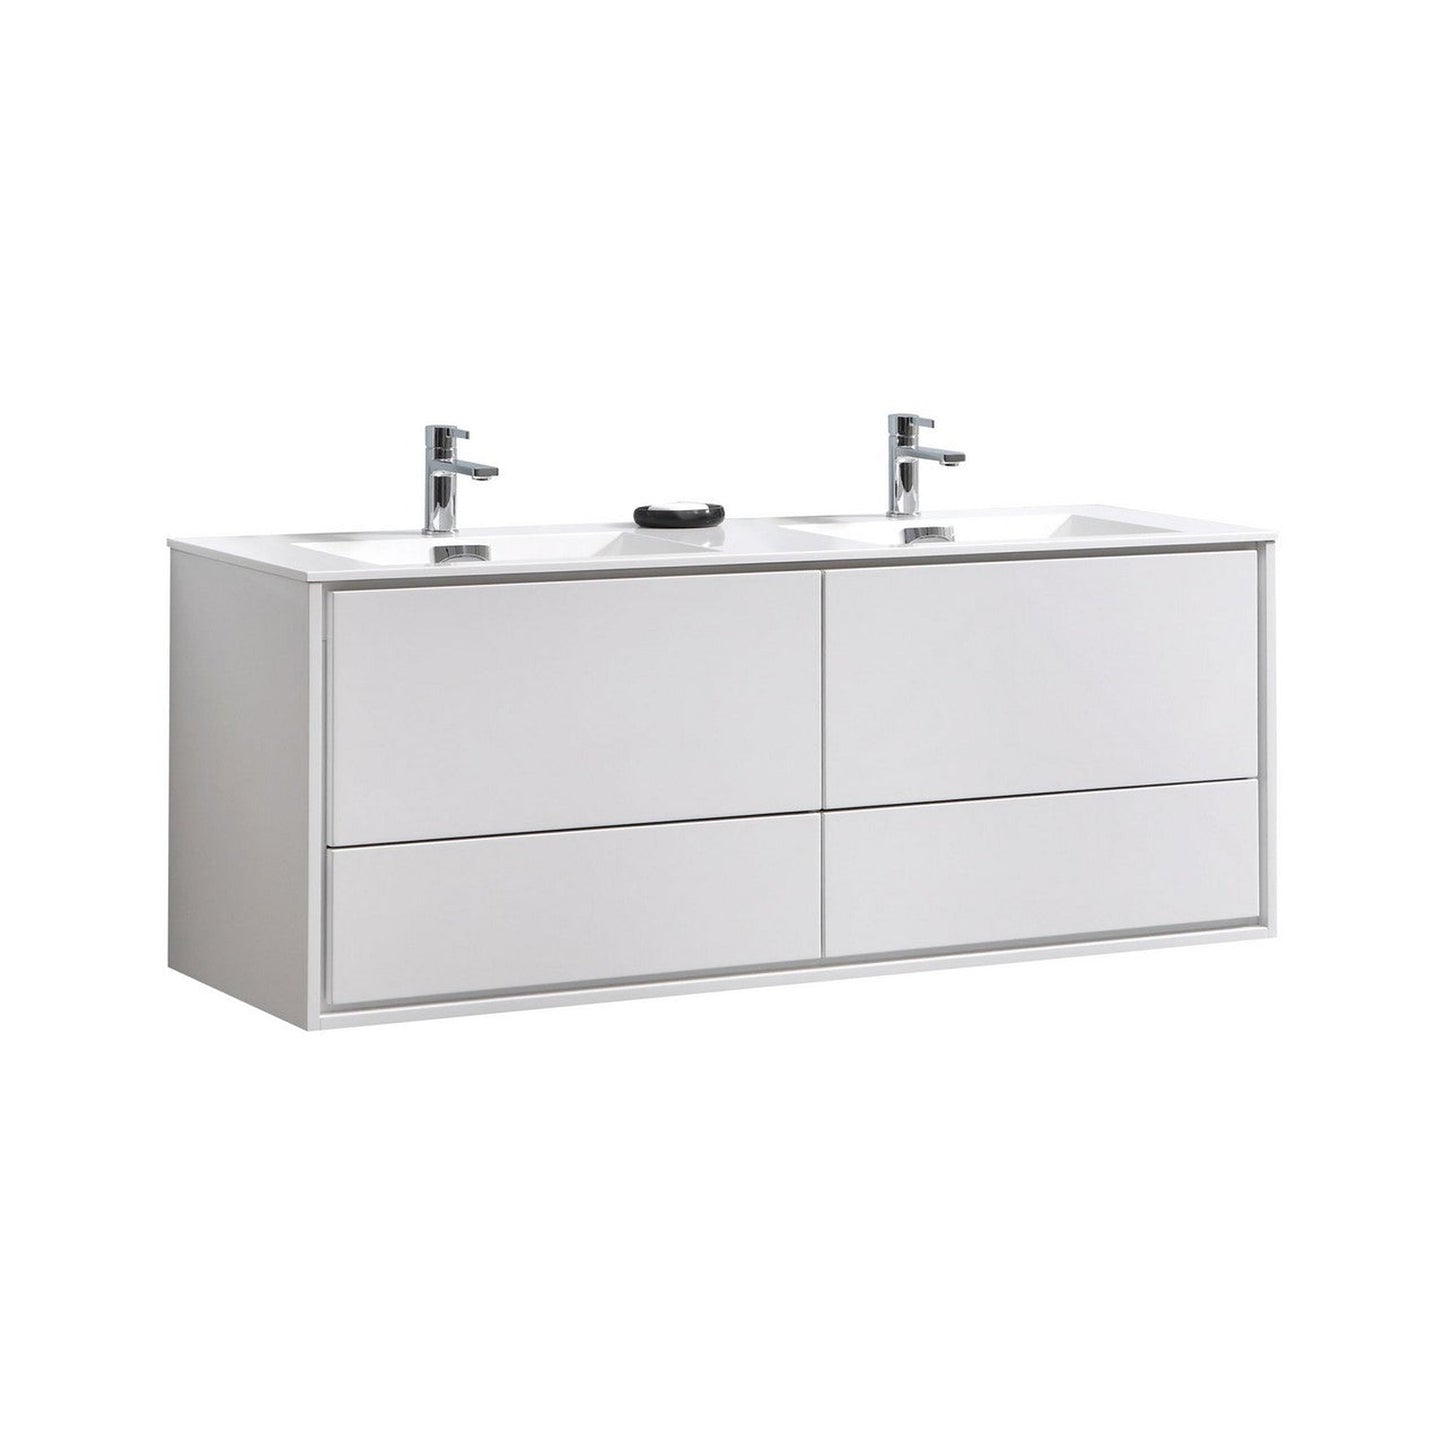 KubeBath DeLusso 60" High Gloss White Wall-Mounted Modern Bathroom Vanity With Double Integrated Acrylic Sink With Overflow